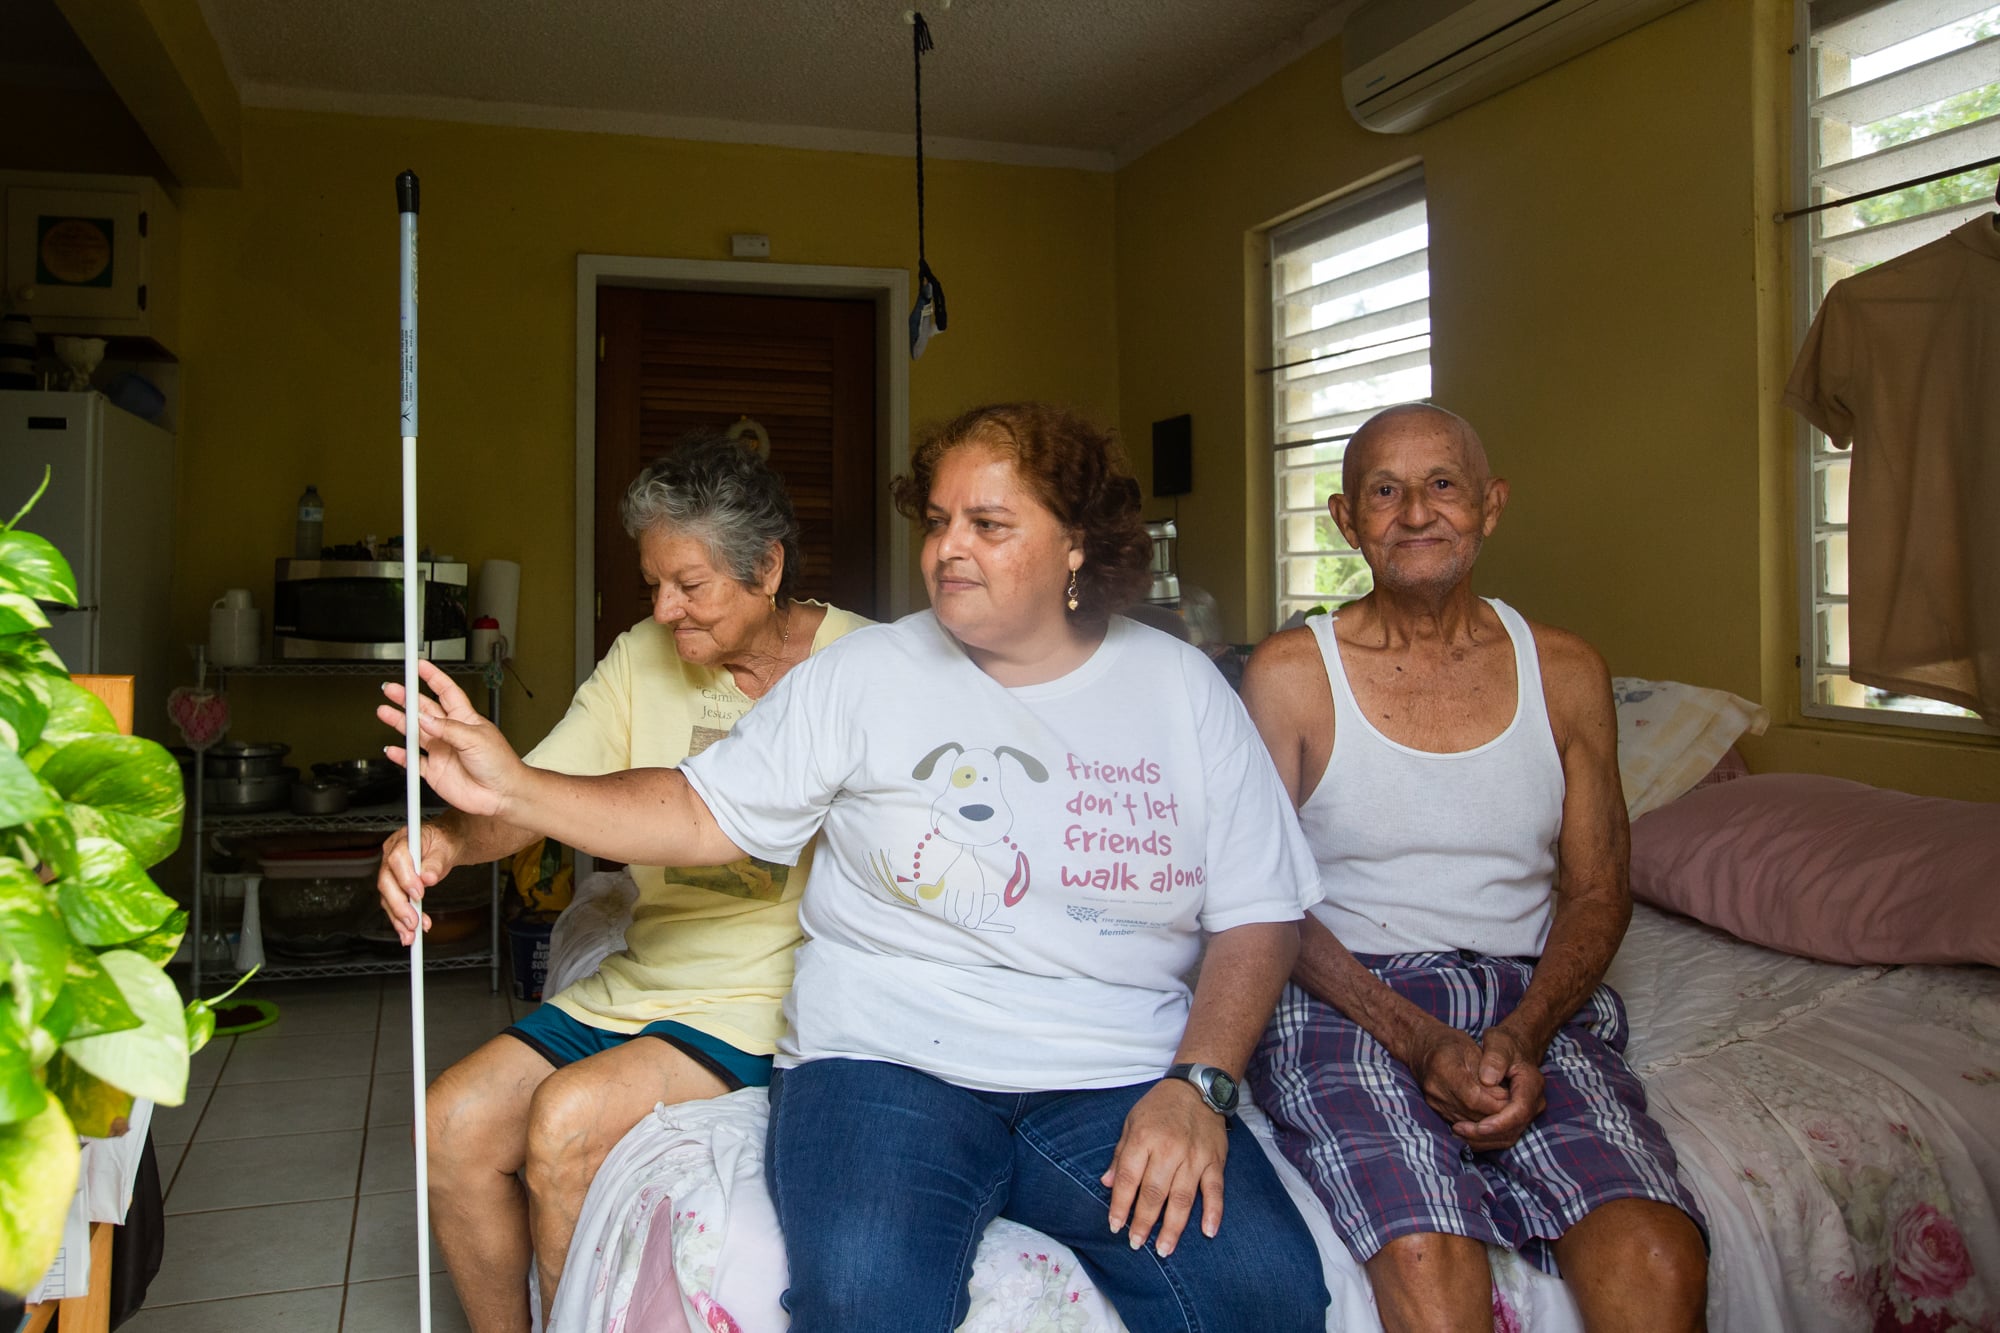 Norma, Carmen (center) and Guillermo Huertas estimate repairs to their home will cost $120,000; so far, they've gotten $27,000 from FEMA. (Anya Magnuson/News21)